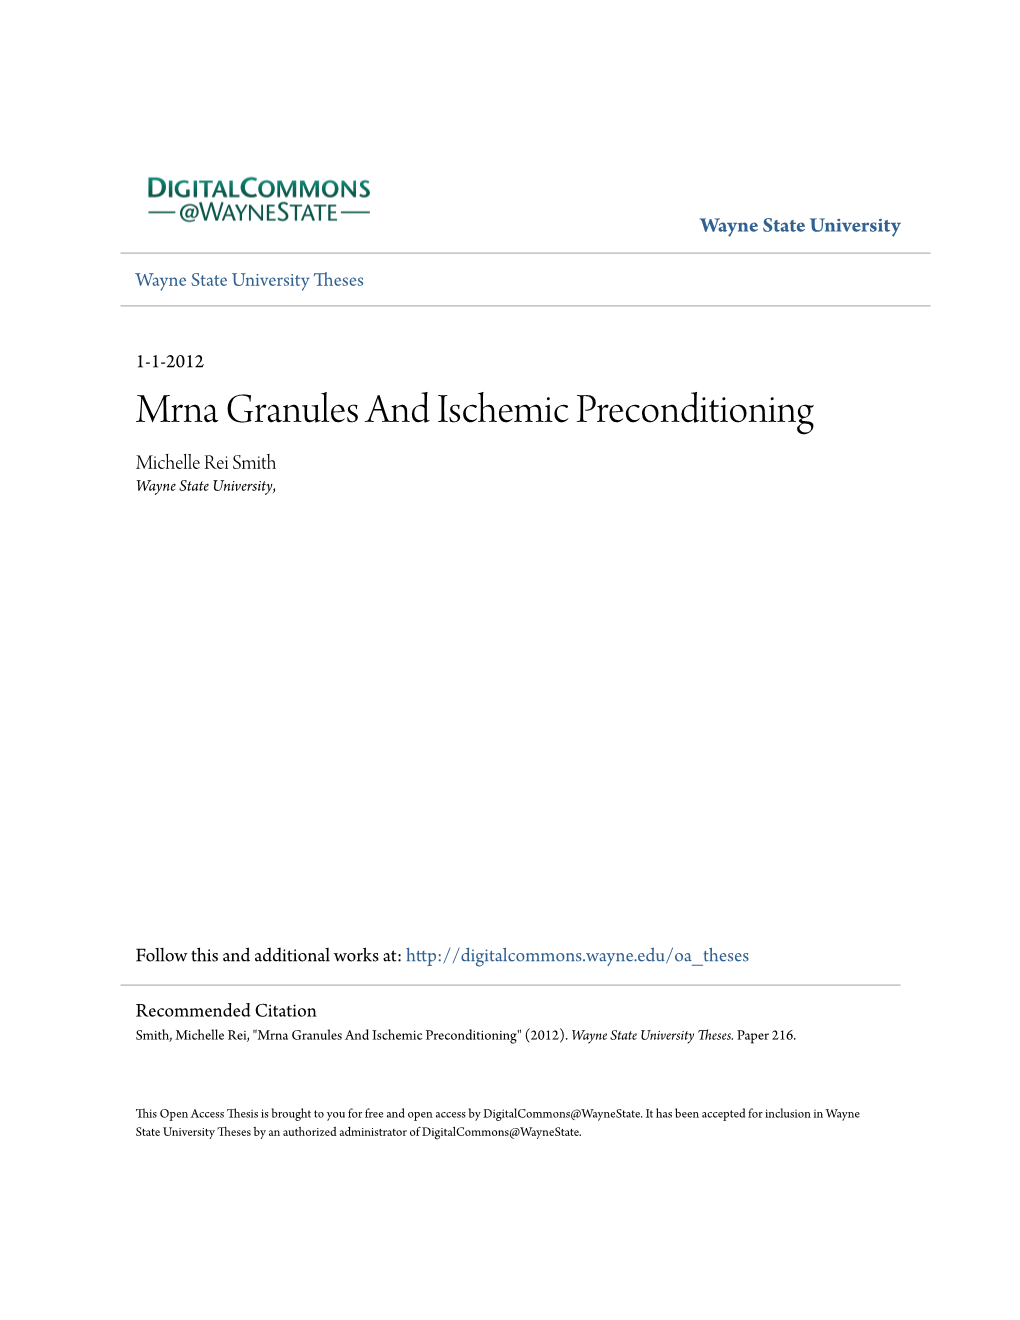 Mrna Granules and Ischemic Preconditioning Michelle Rei Smith Wayne State University